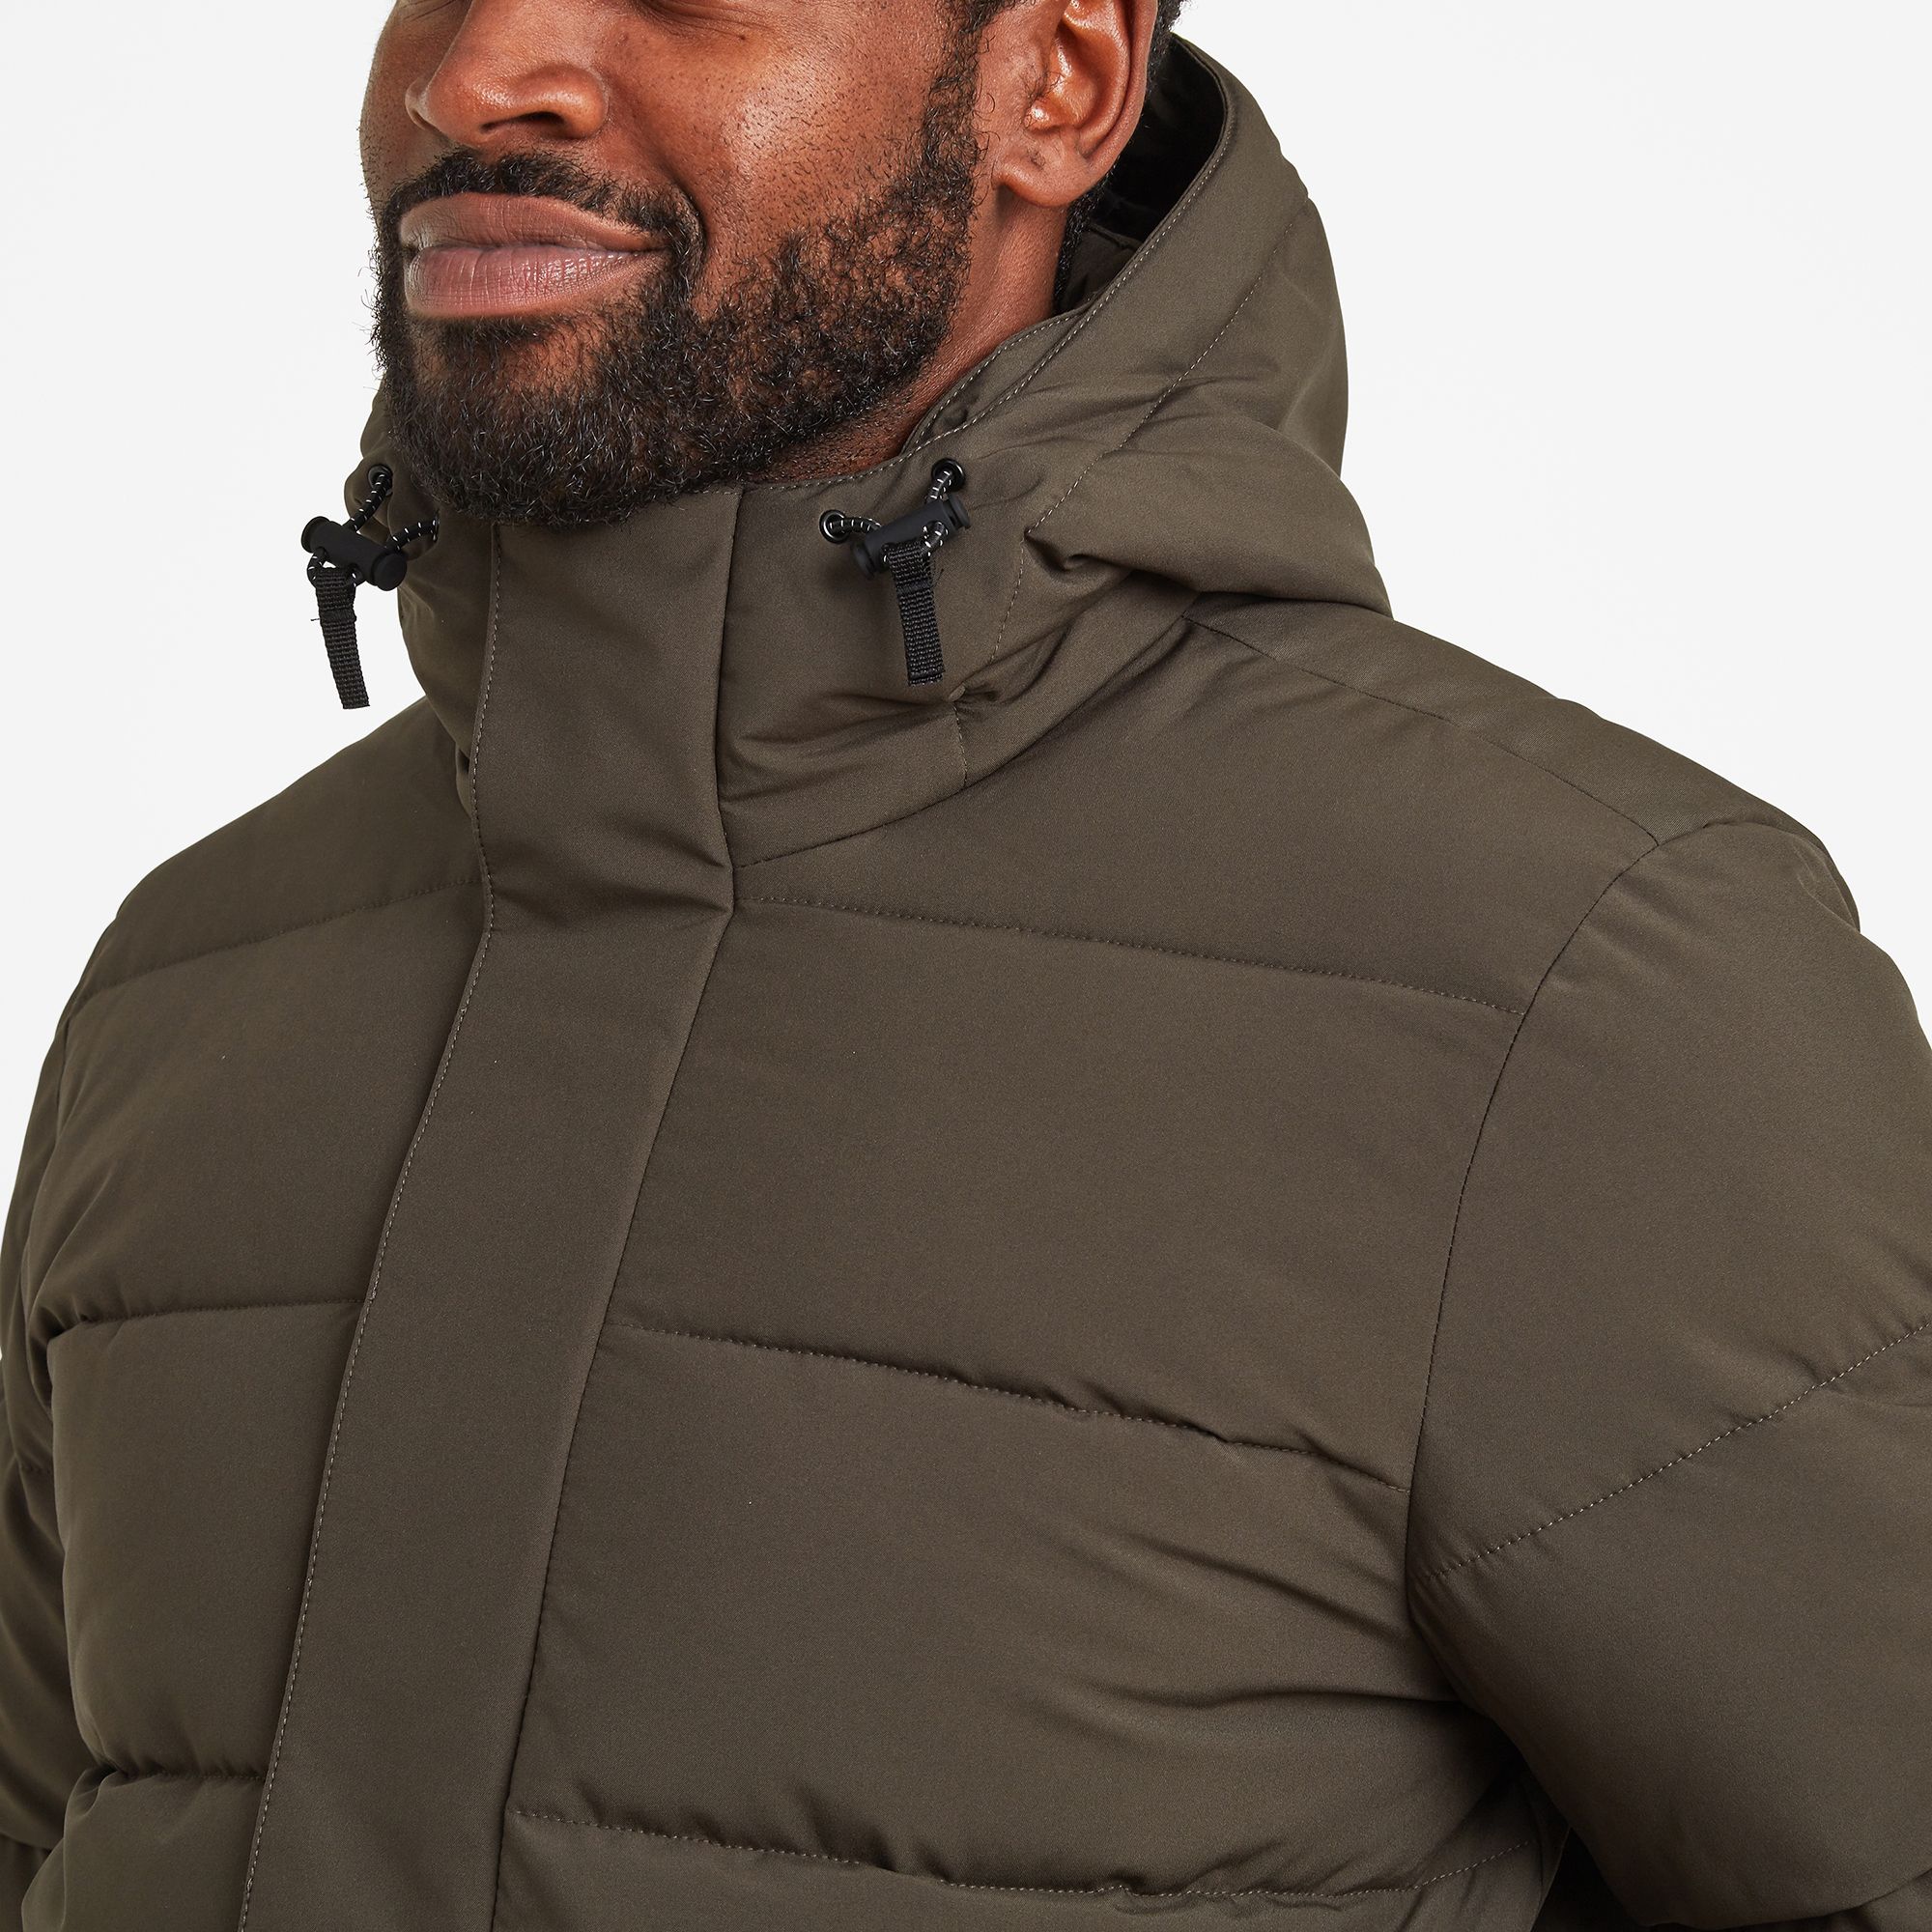 Robust and expertly designed to stand up to chilly Yorkshire winters, our chunky Askham padded jacket is perfect for days when you need to bundle up against the cold. The high performing, hard wearing outer fabric and insulated quilted body and sleeves keeps you incredibly warm and the cosy high neck and fixed, fully adjustable hood provides extra protection against the biting wind. A concealed front zip with press studs and easy Velcro fastening tab give a streamlined finish and a handy inside zip pocket, along with two outside zip pockets with chunky, wide openings, are perfect for securely carrying your wallet, phone and keys. Askham is finished with a silky taffeta lining, making it easy to slip on and off, and an embossed rubber Yorkshire Rose badge on the sleeve, heralding our Truth over Glory ethos.